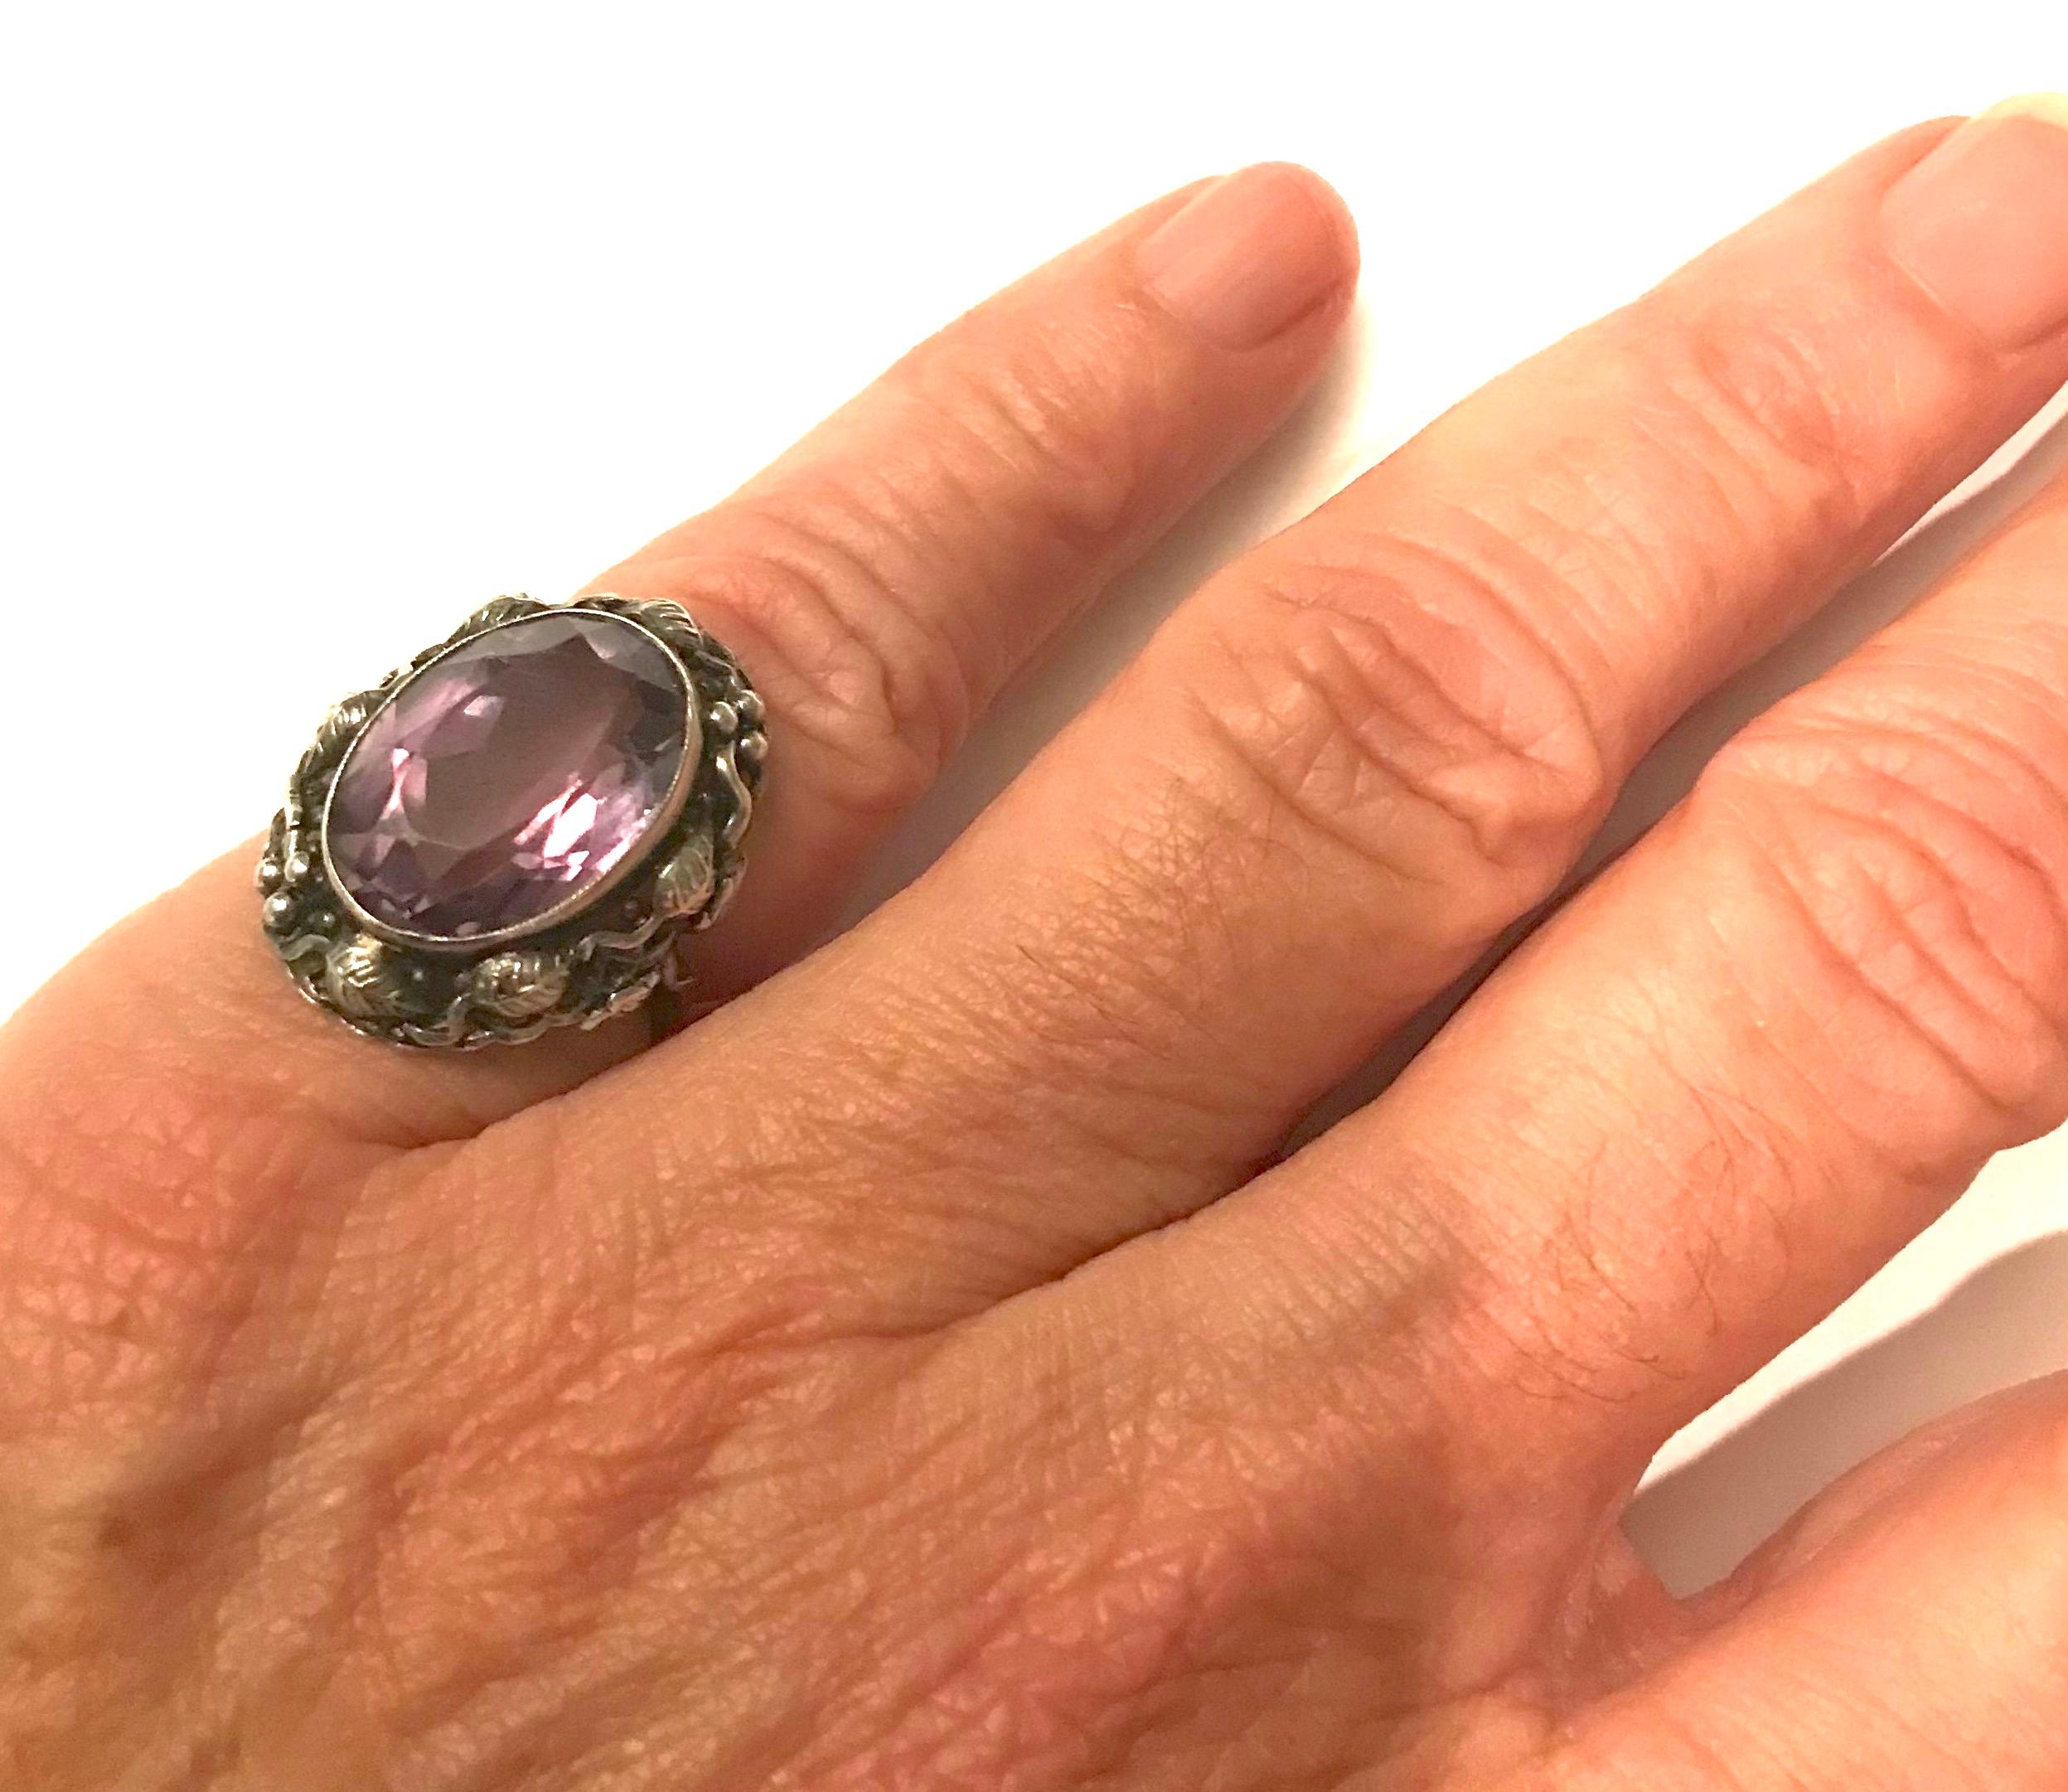 Women's or Men's Sterling Silver Amethyst Ring, Arts & Crafts, circa 1900